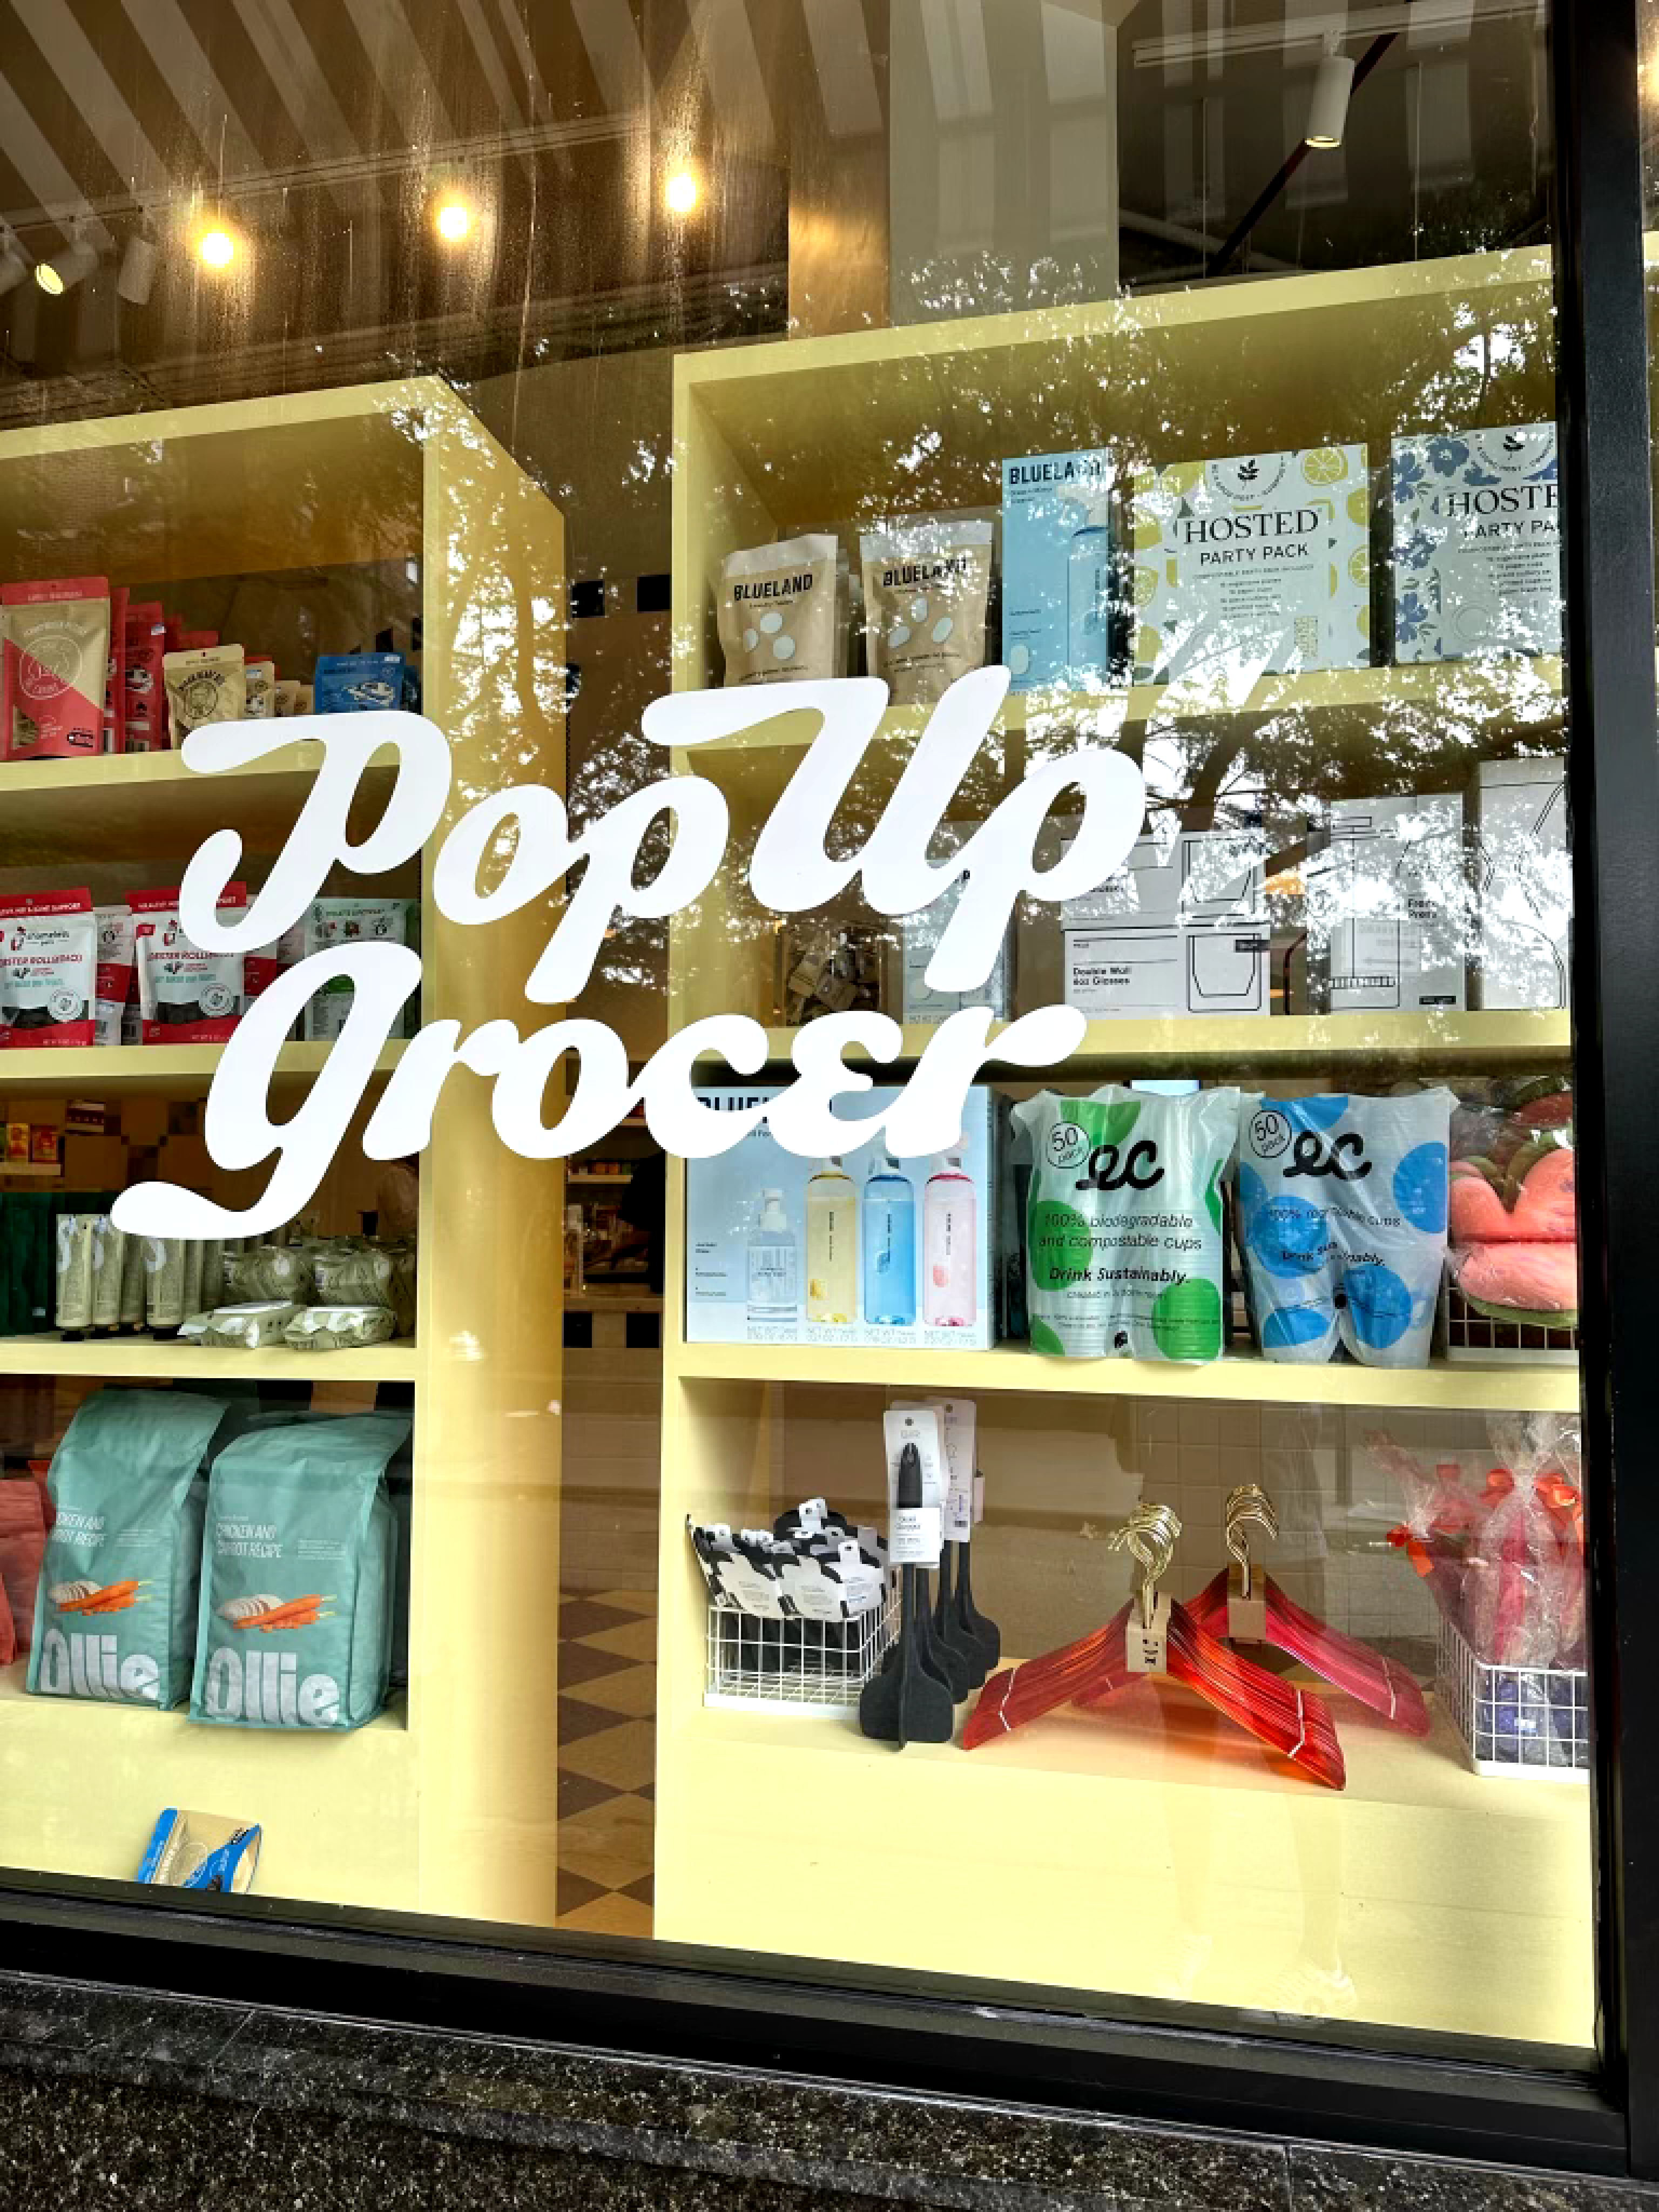 Pop-Up Grocer Summer Collection